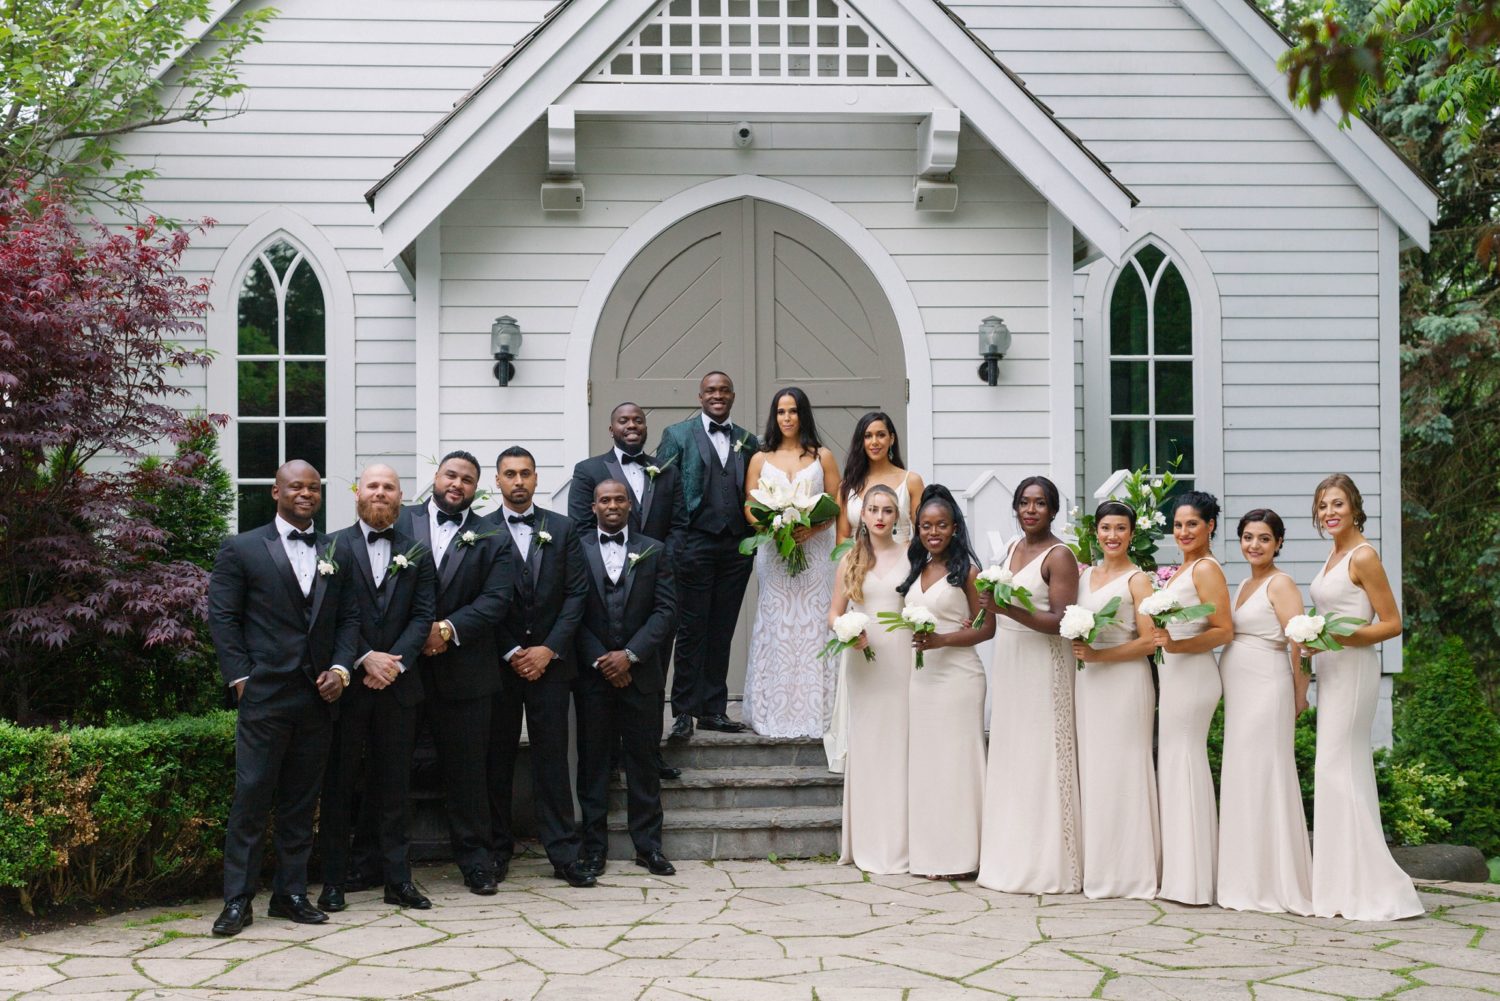 Large Bridal Party wedding photo inside the The Doctor's House in Kleinburg, Ontario | Photo by Samantha Clarke